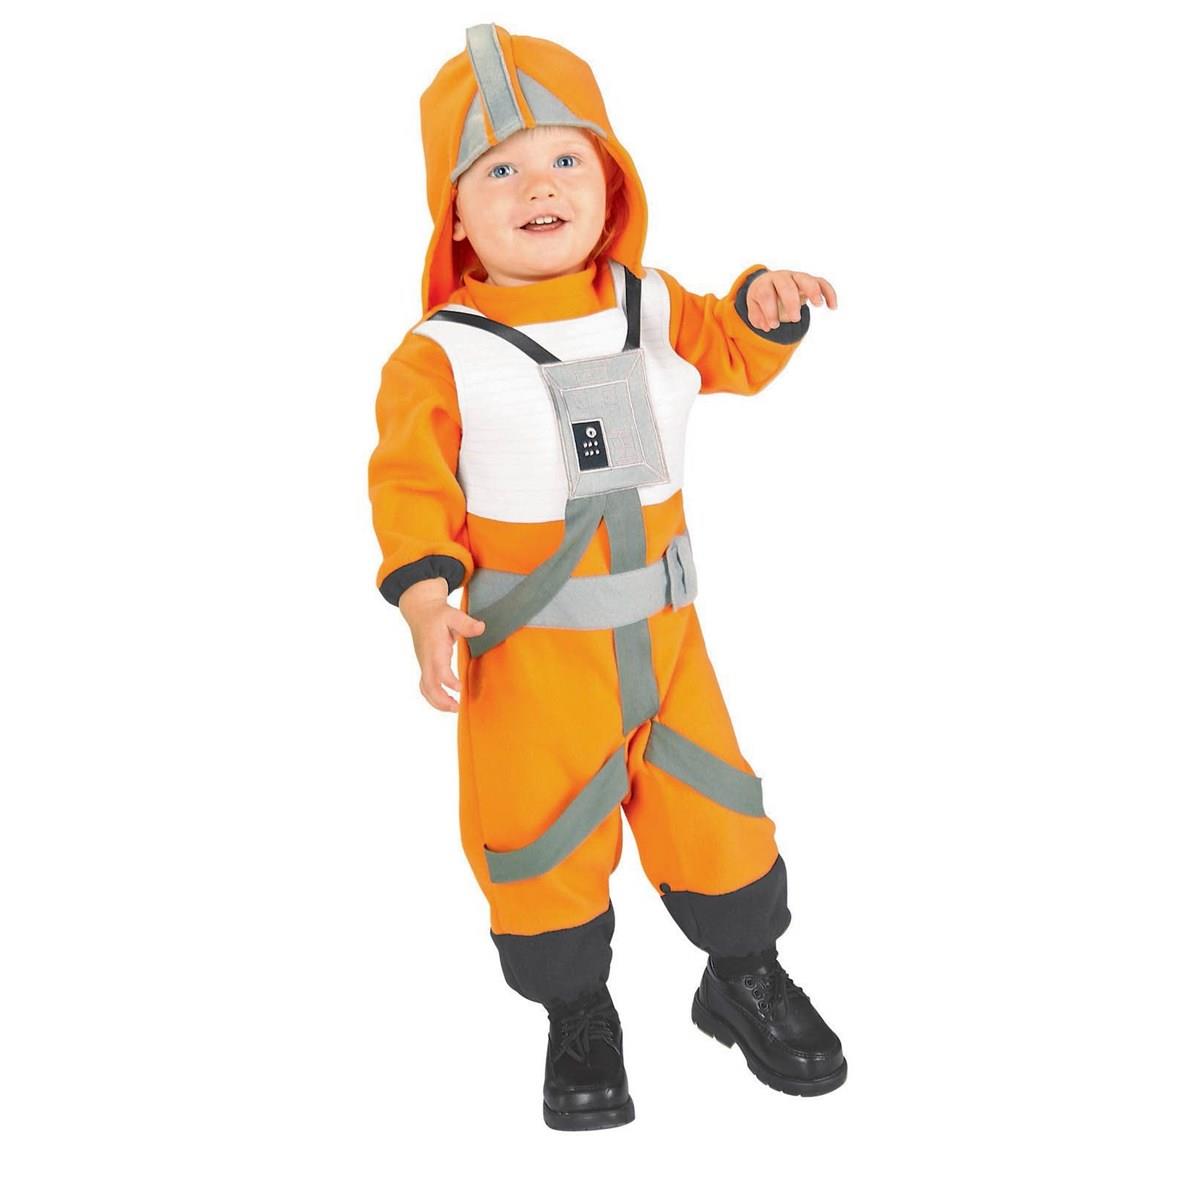 284262 Star Wars Toddler X-wing Fighter Pilot Costume, Size 2-4t